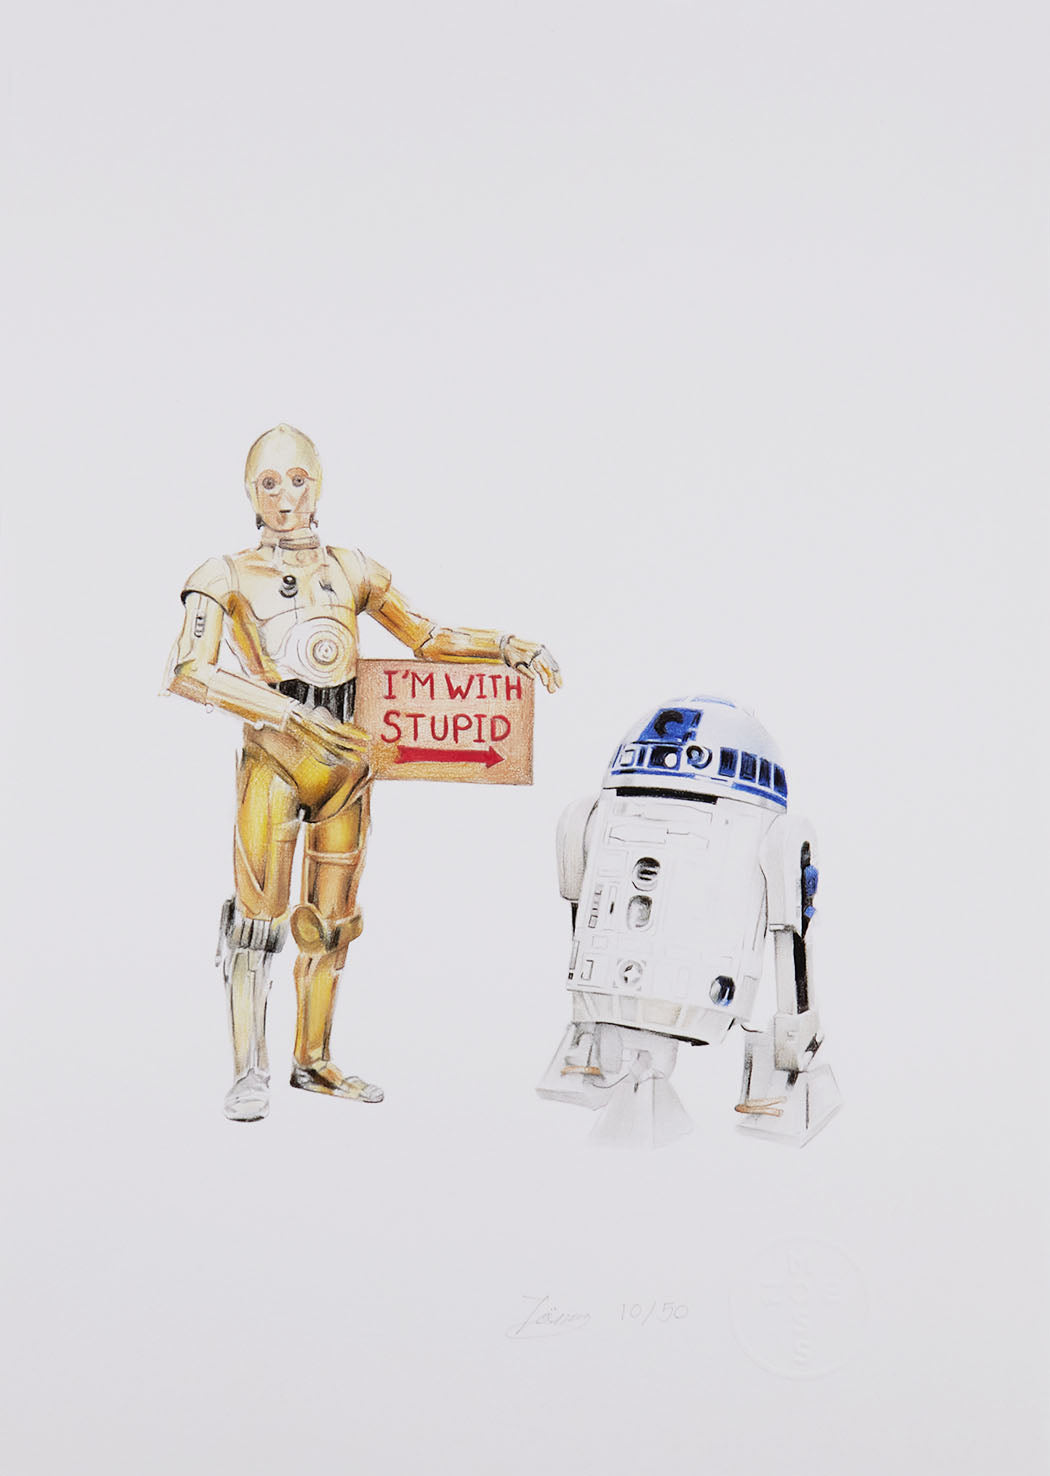 I'm With Stupid-C3PO and R2D2 Enlarged